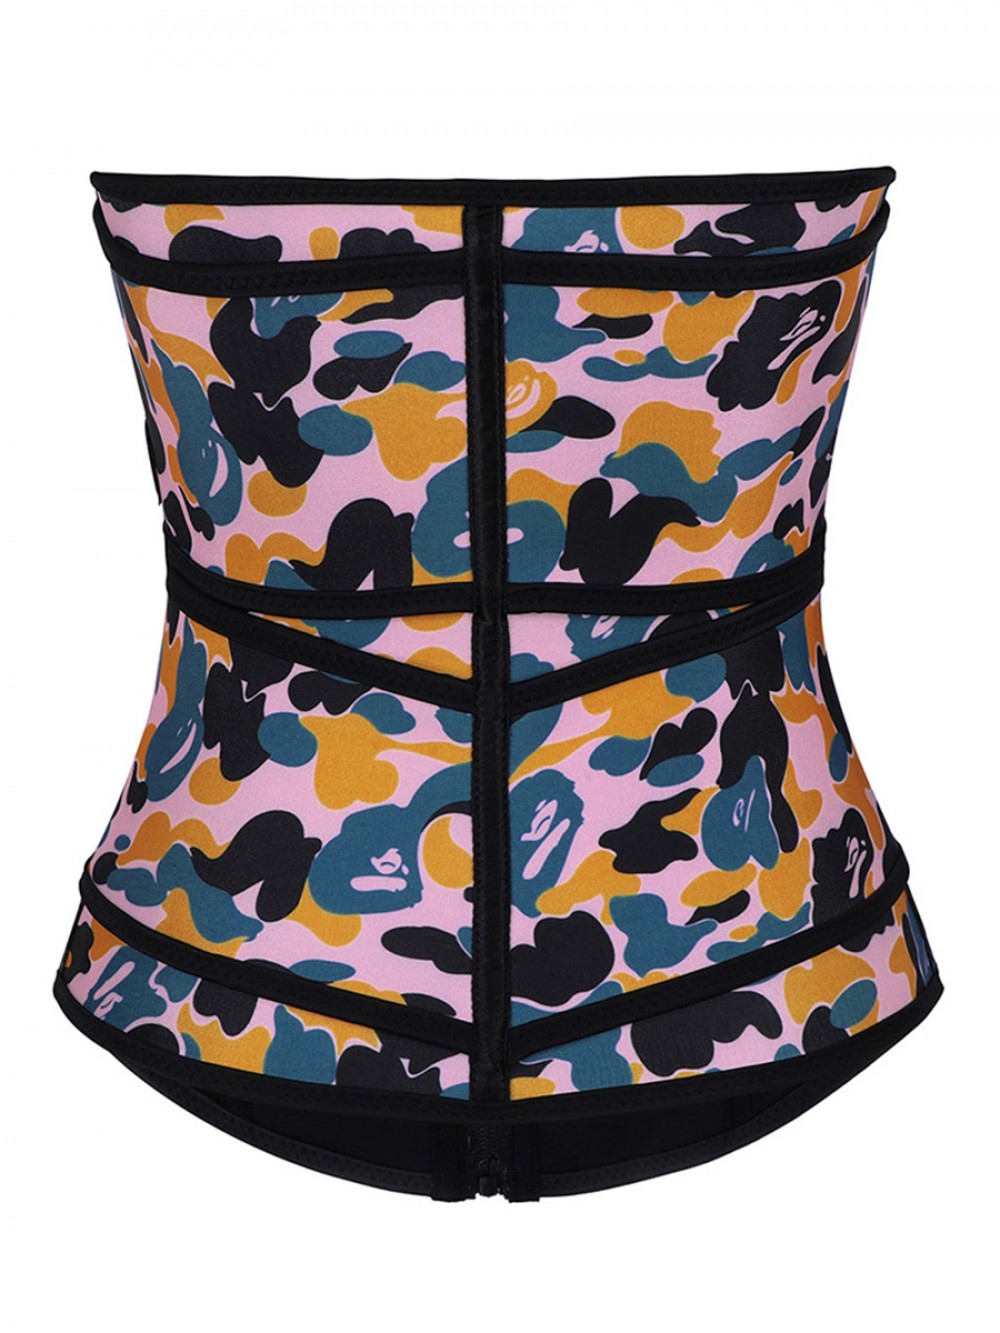 Best Latex Waist Trainer Camo Printed Double Belts Weight Loss